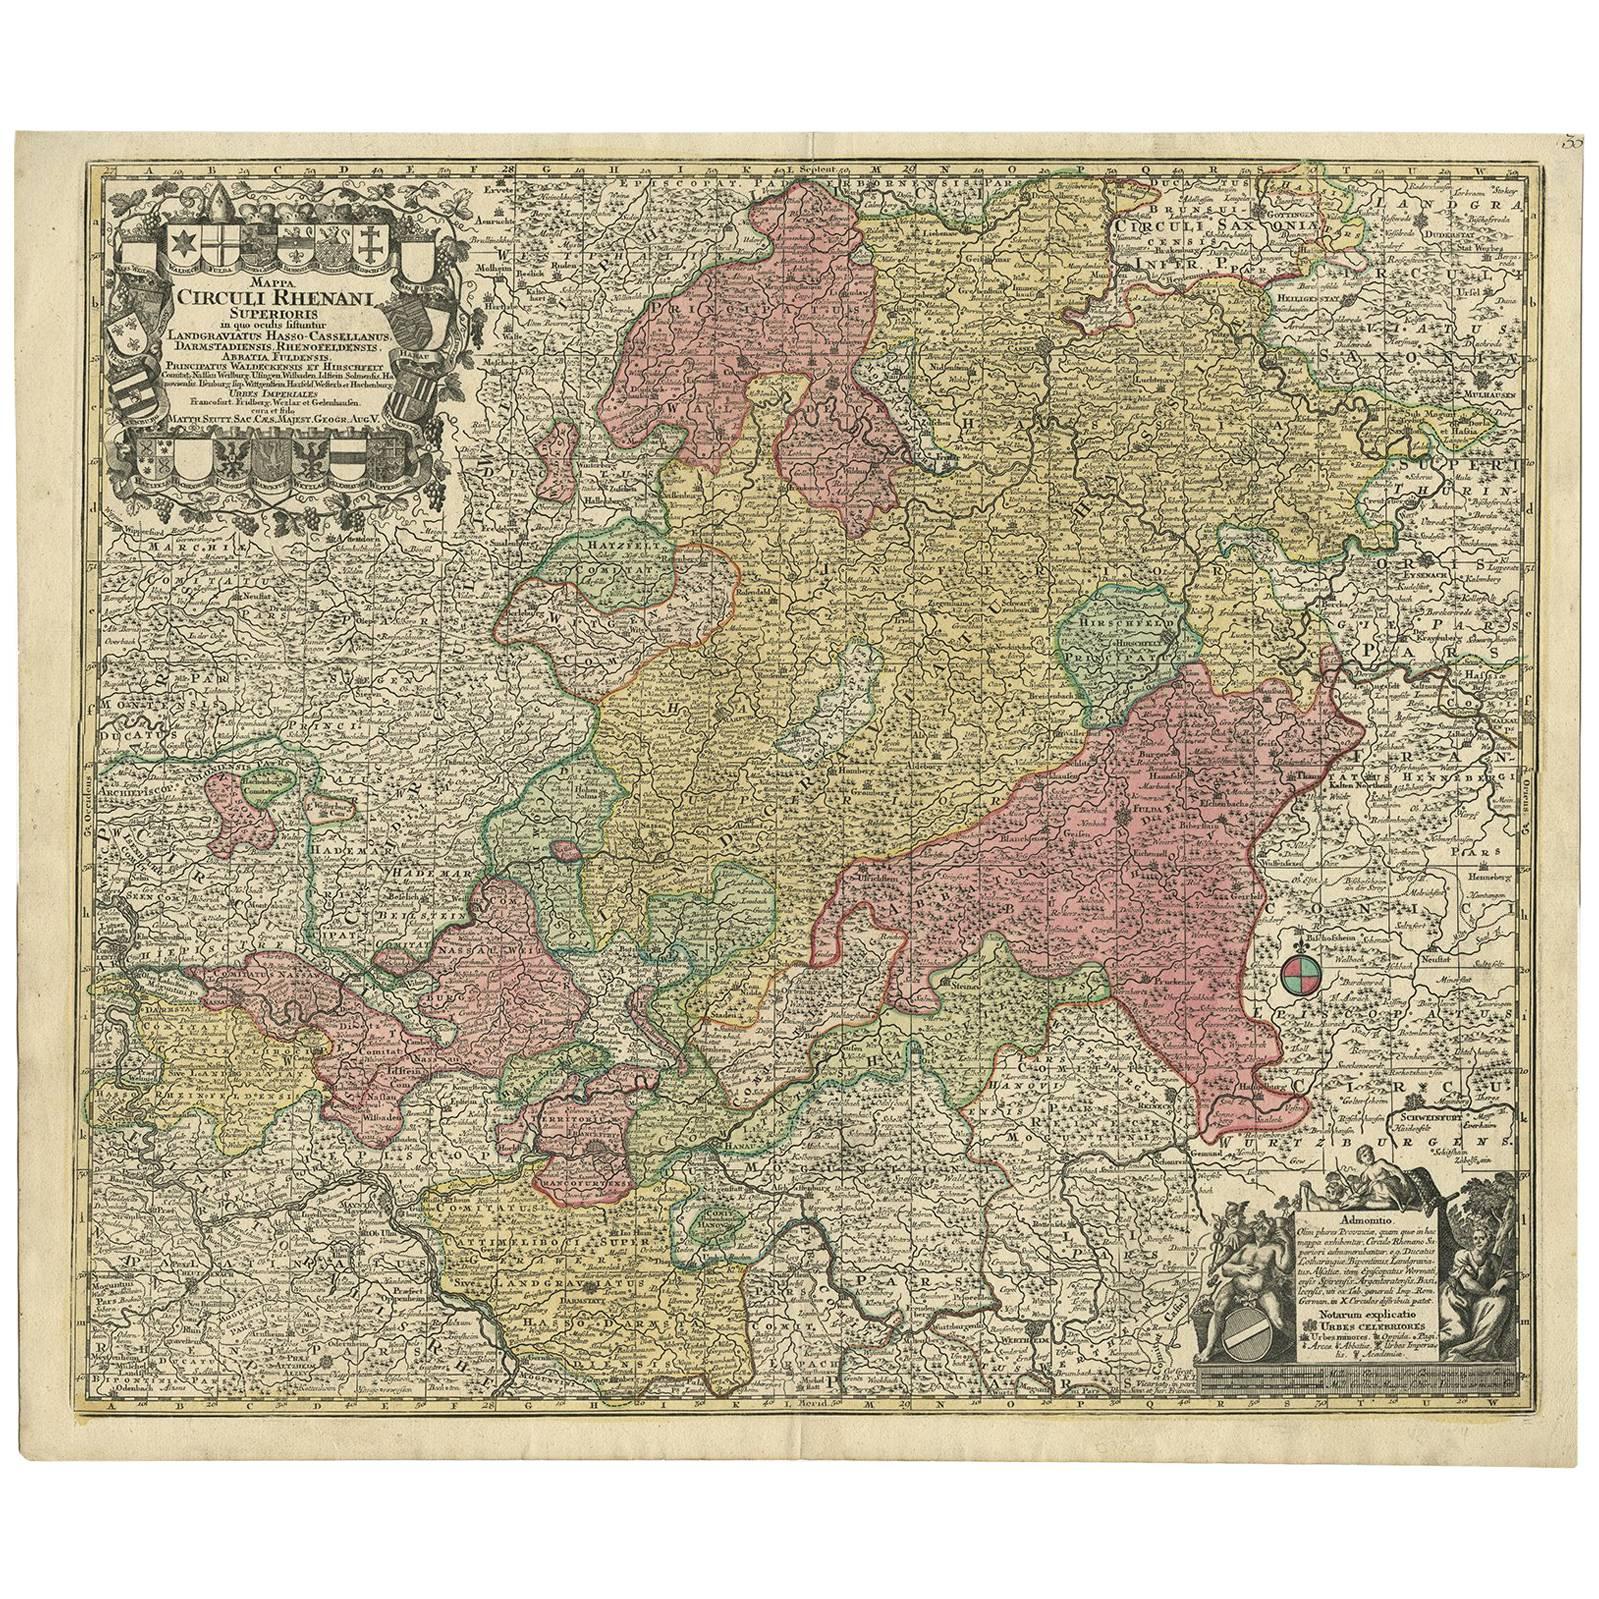 Hand-Colored Antique Map of part of Germany by M. Seutter, c. 1730